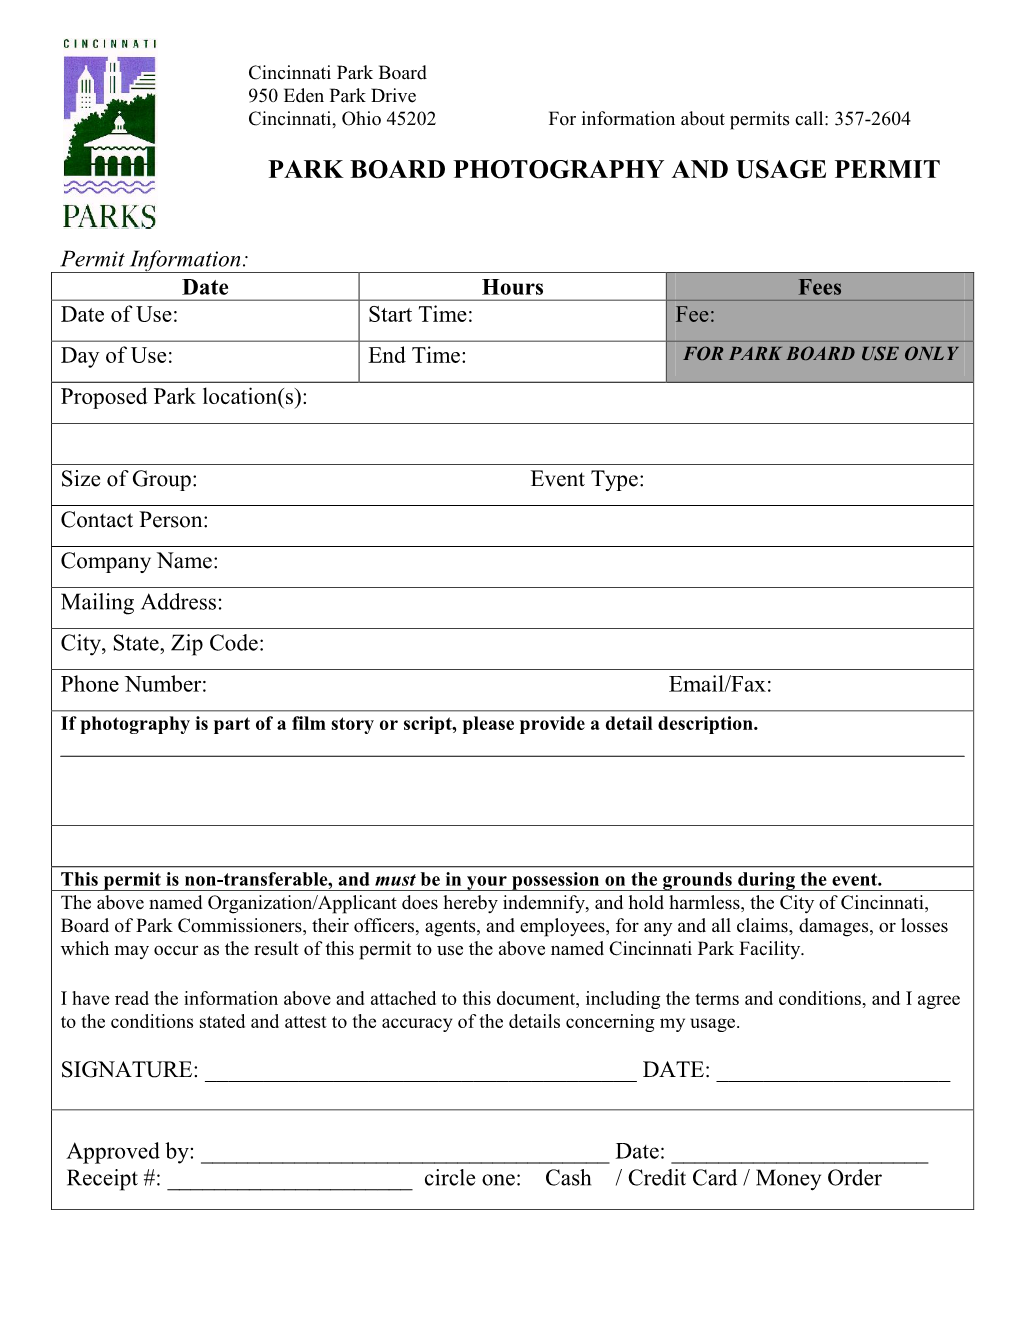 Park Board Photography and Usage Permit